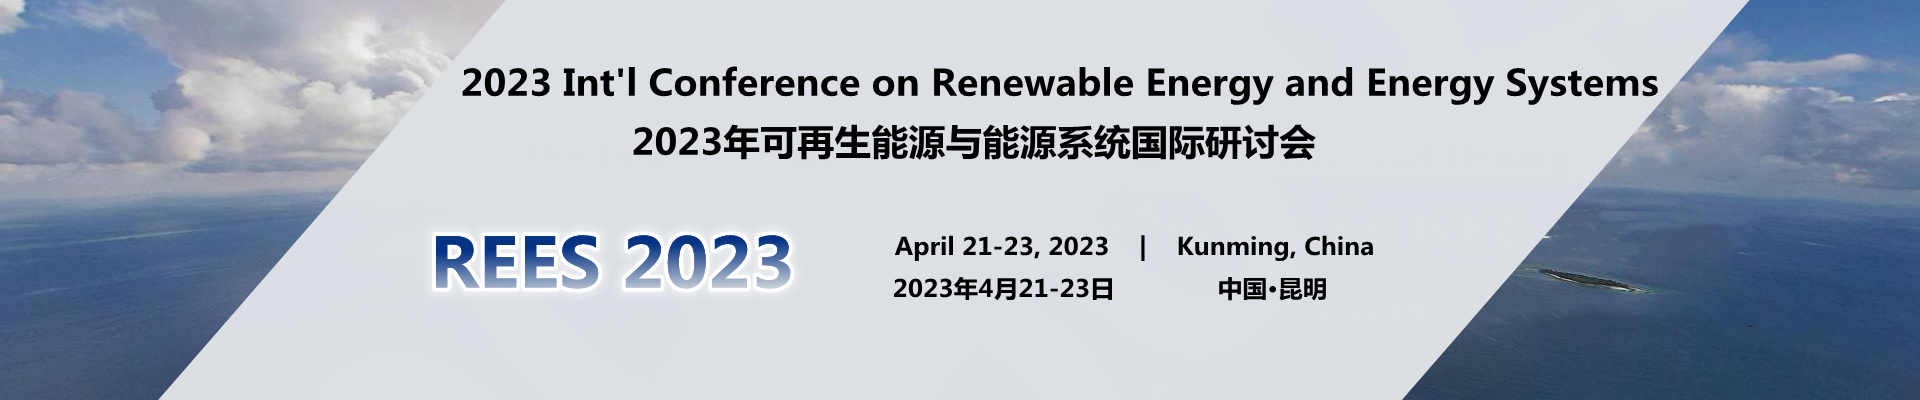 2023 Int'l Conference on Renewable Energy and Energy Systems (REES 2023)